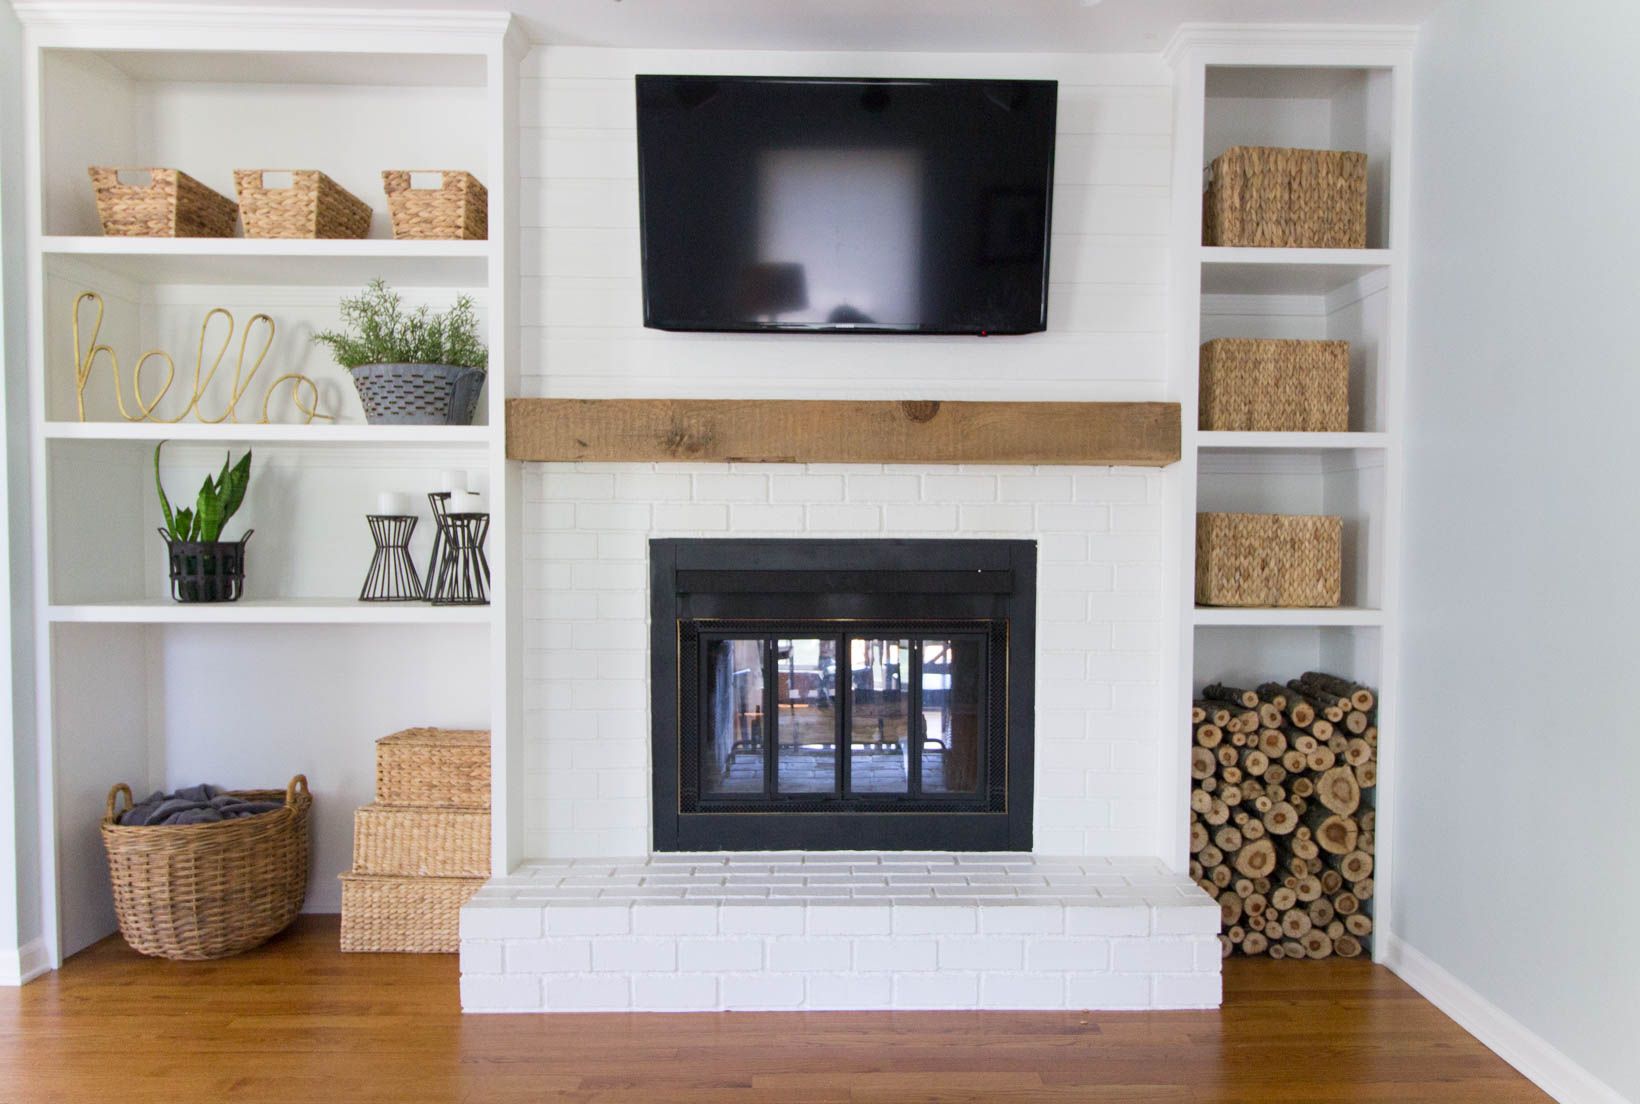 Fireplace Bookcase Beautiful Built In Shelves Around Shallow Depth Brick Fireplace